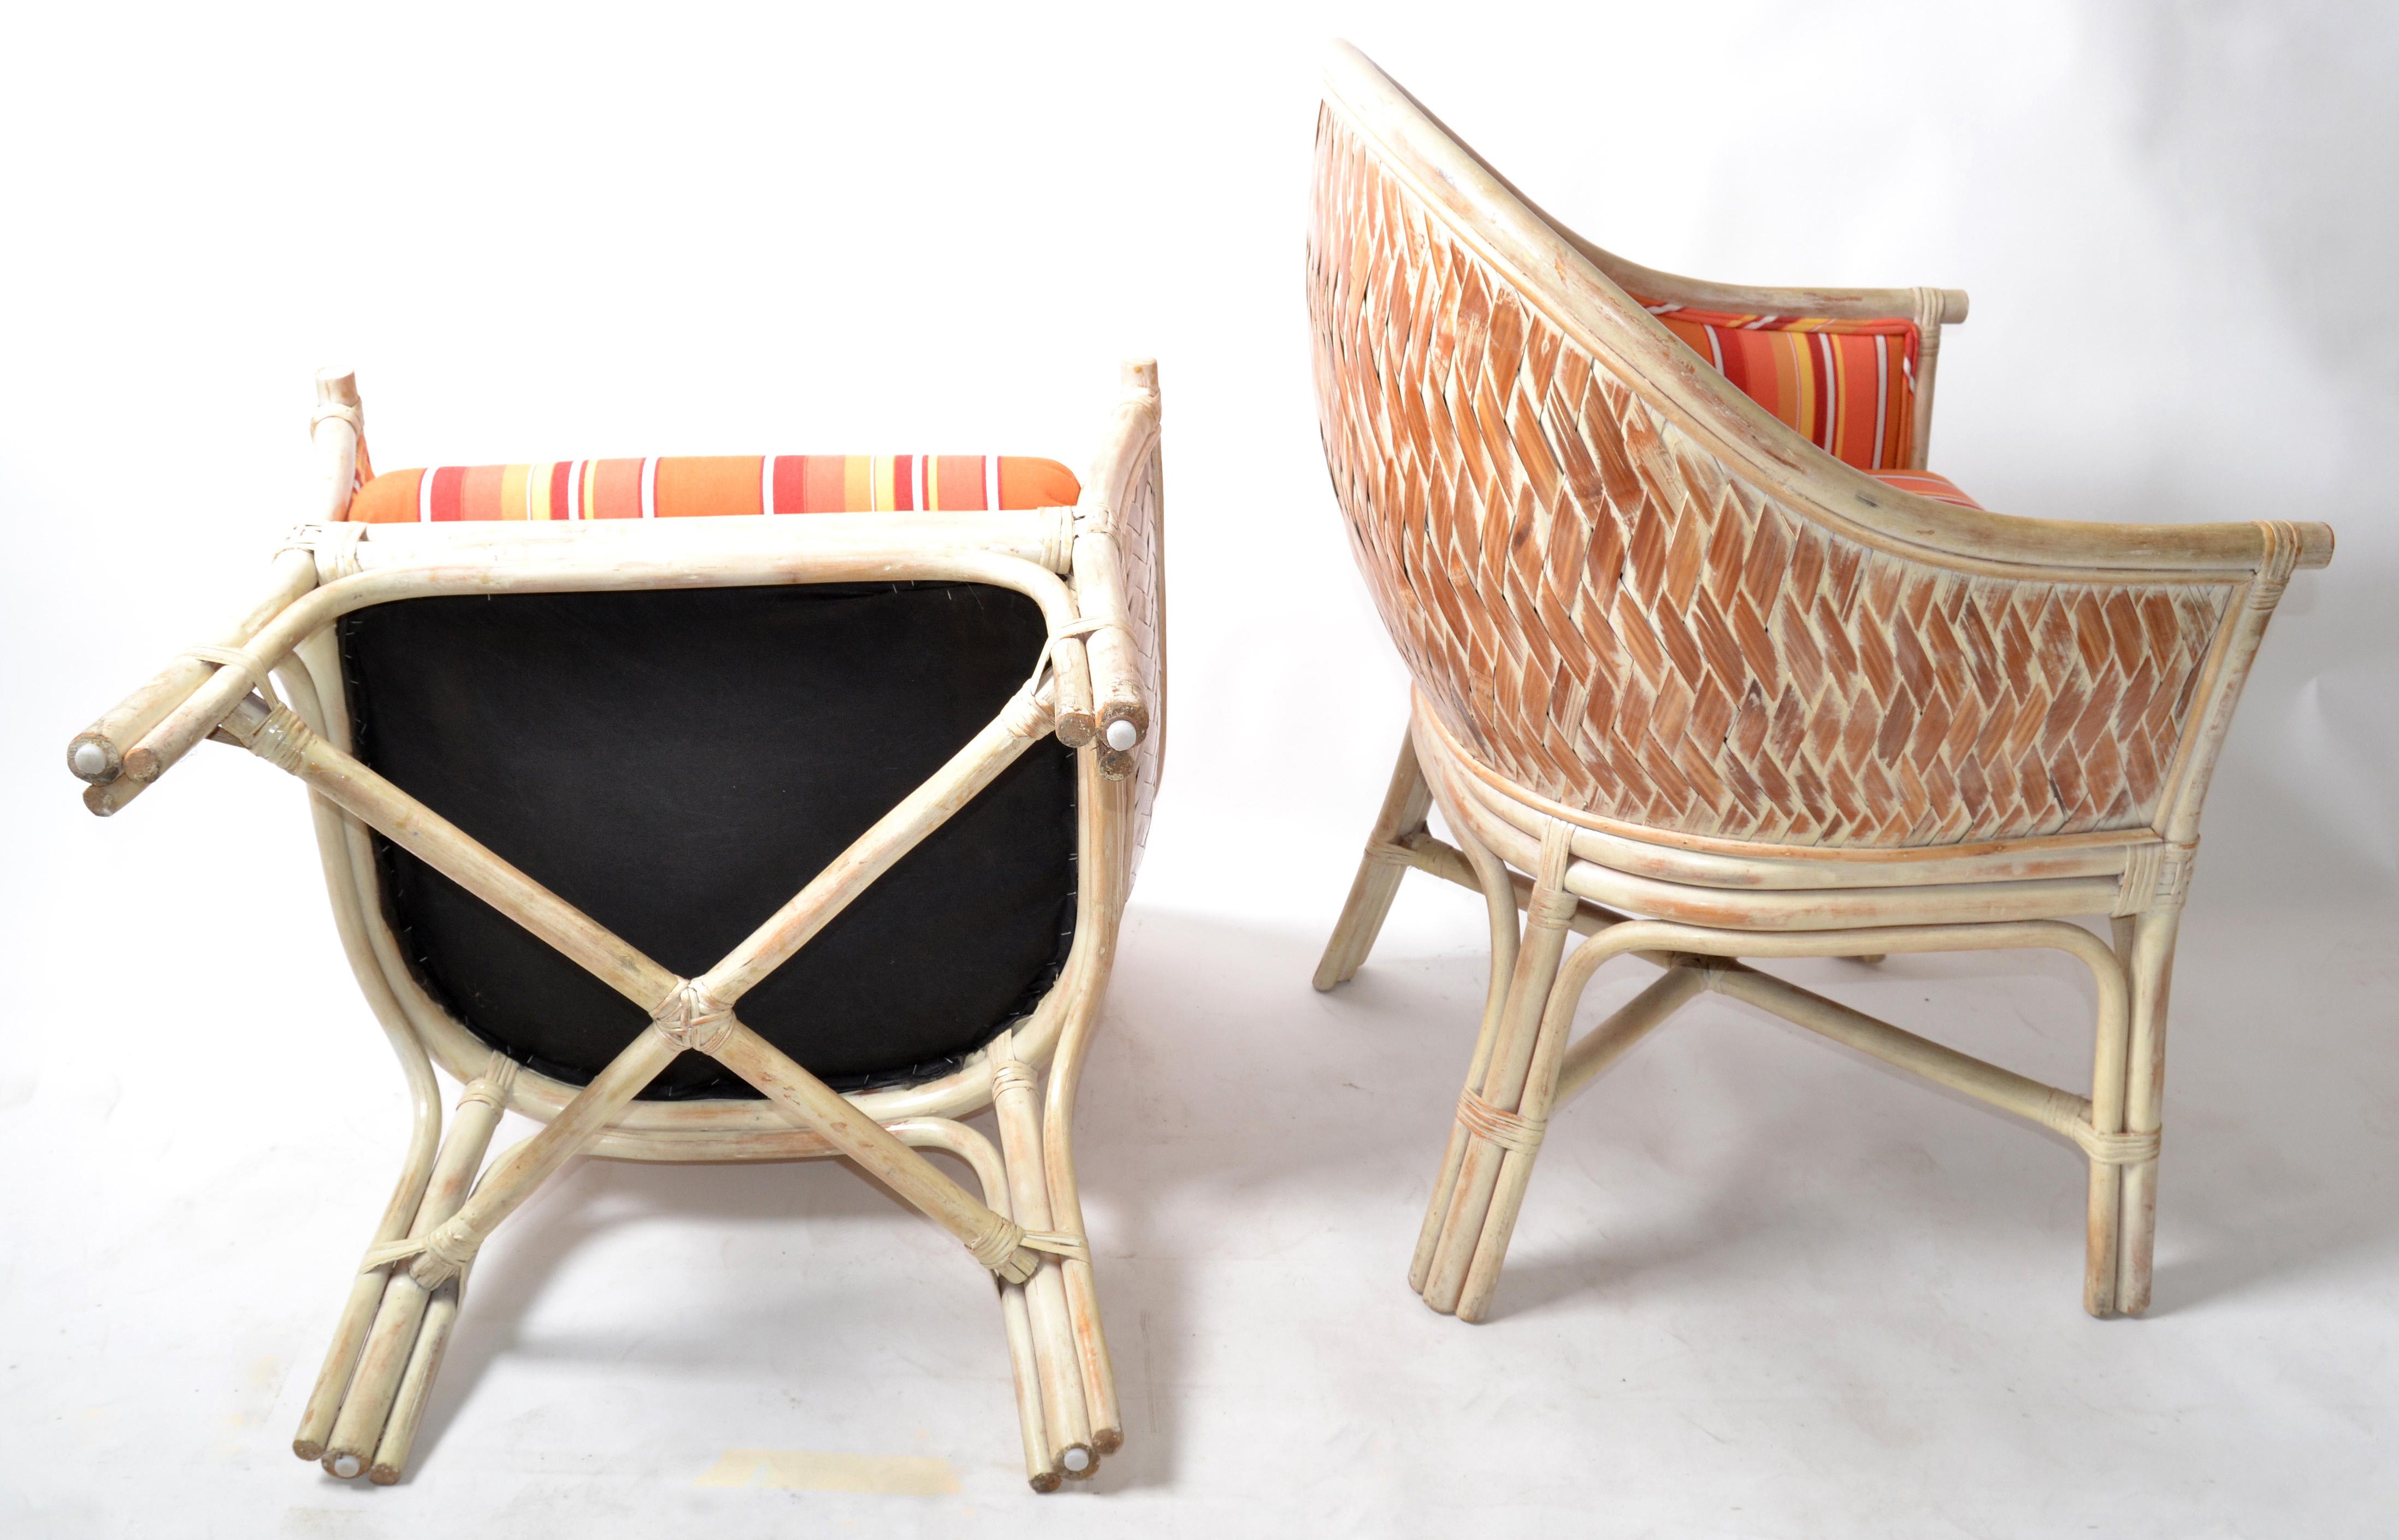 Pair, Mid-Century Modern Bamboo & Cane Armchair Orange Striped Upholstery, 1970 For Sale 5